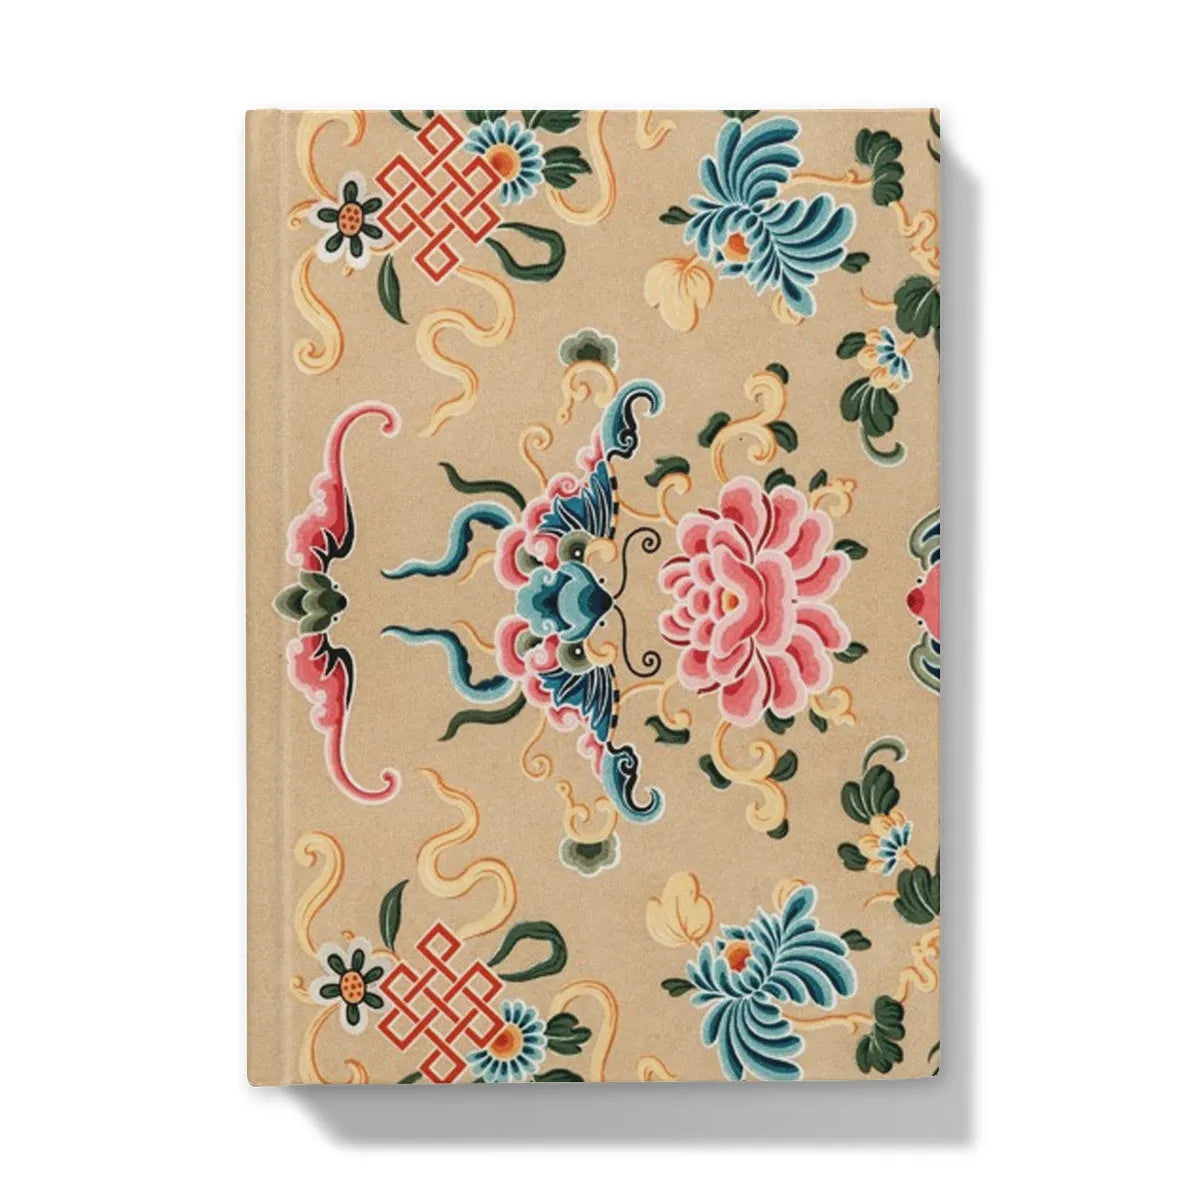 This Chinese Pattern By Auguste Racinet Hardback Journal - 5’x7’ / Lined - Notebooks & Notepads - Aesthetic Art